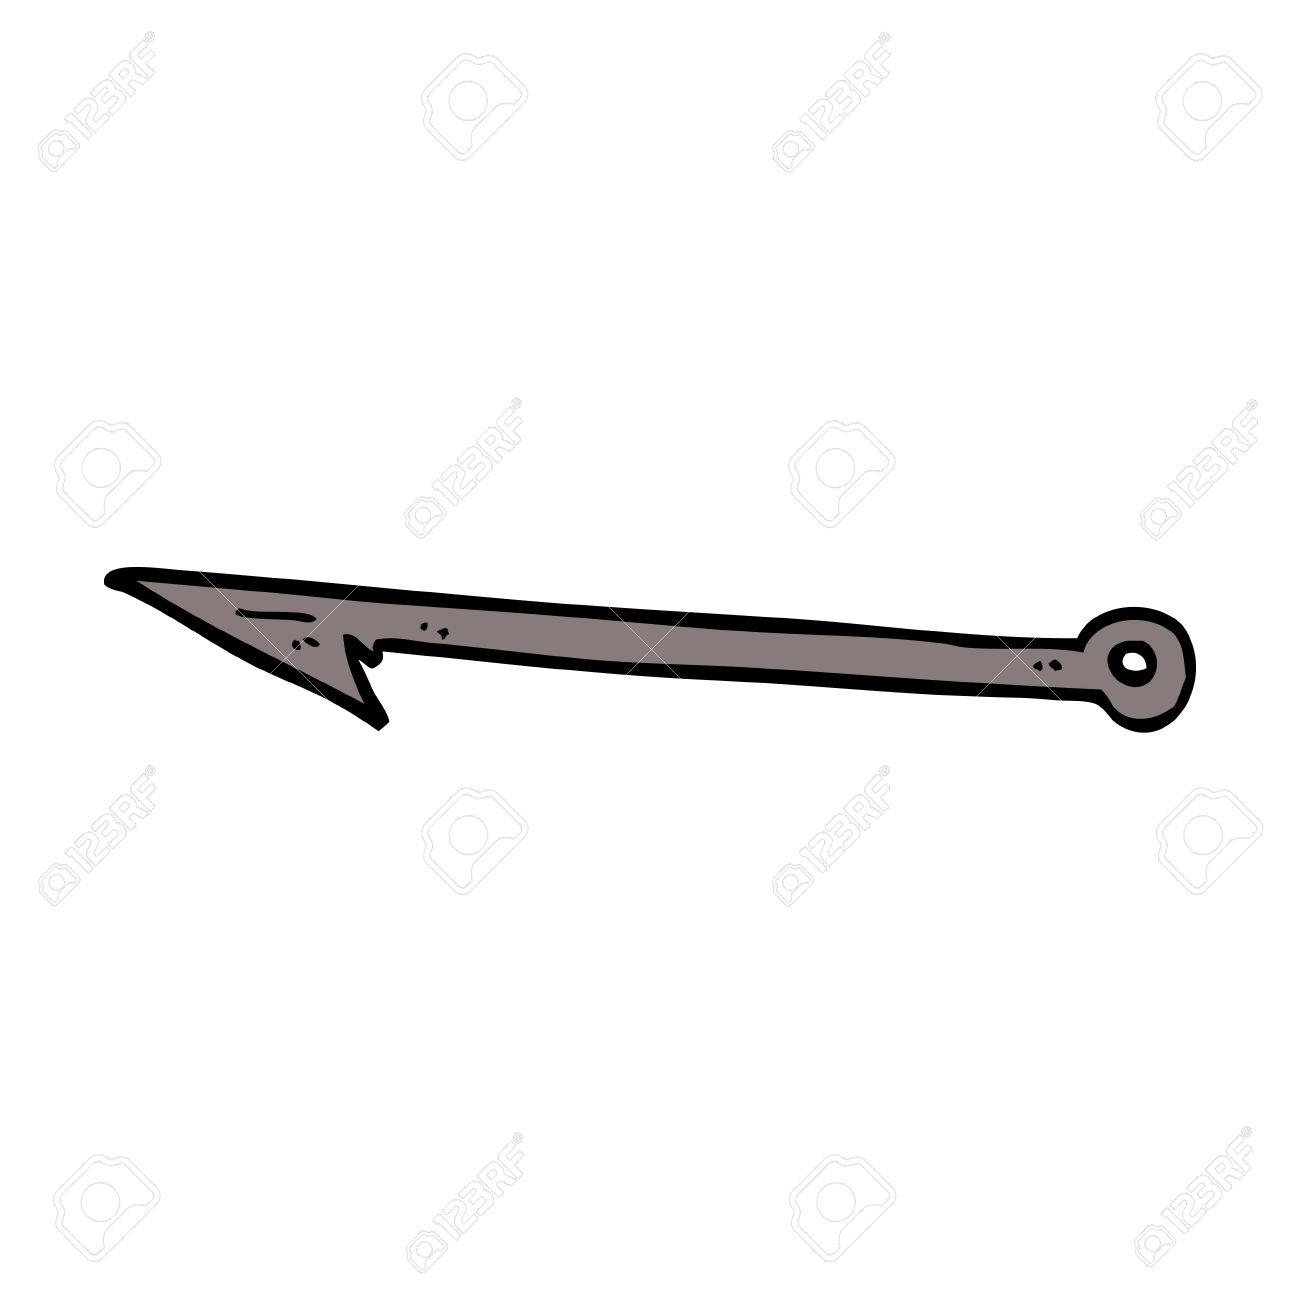 Harpoon clipart #6, Download drawings